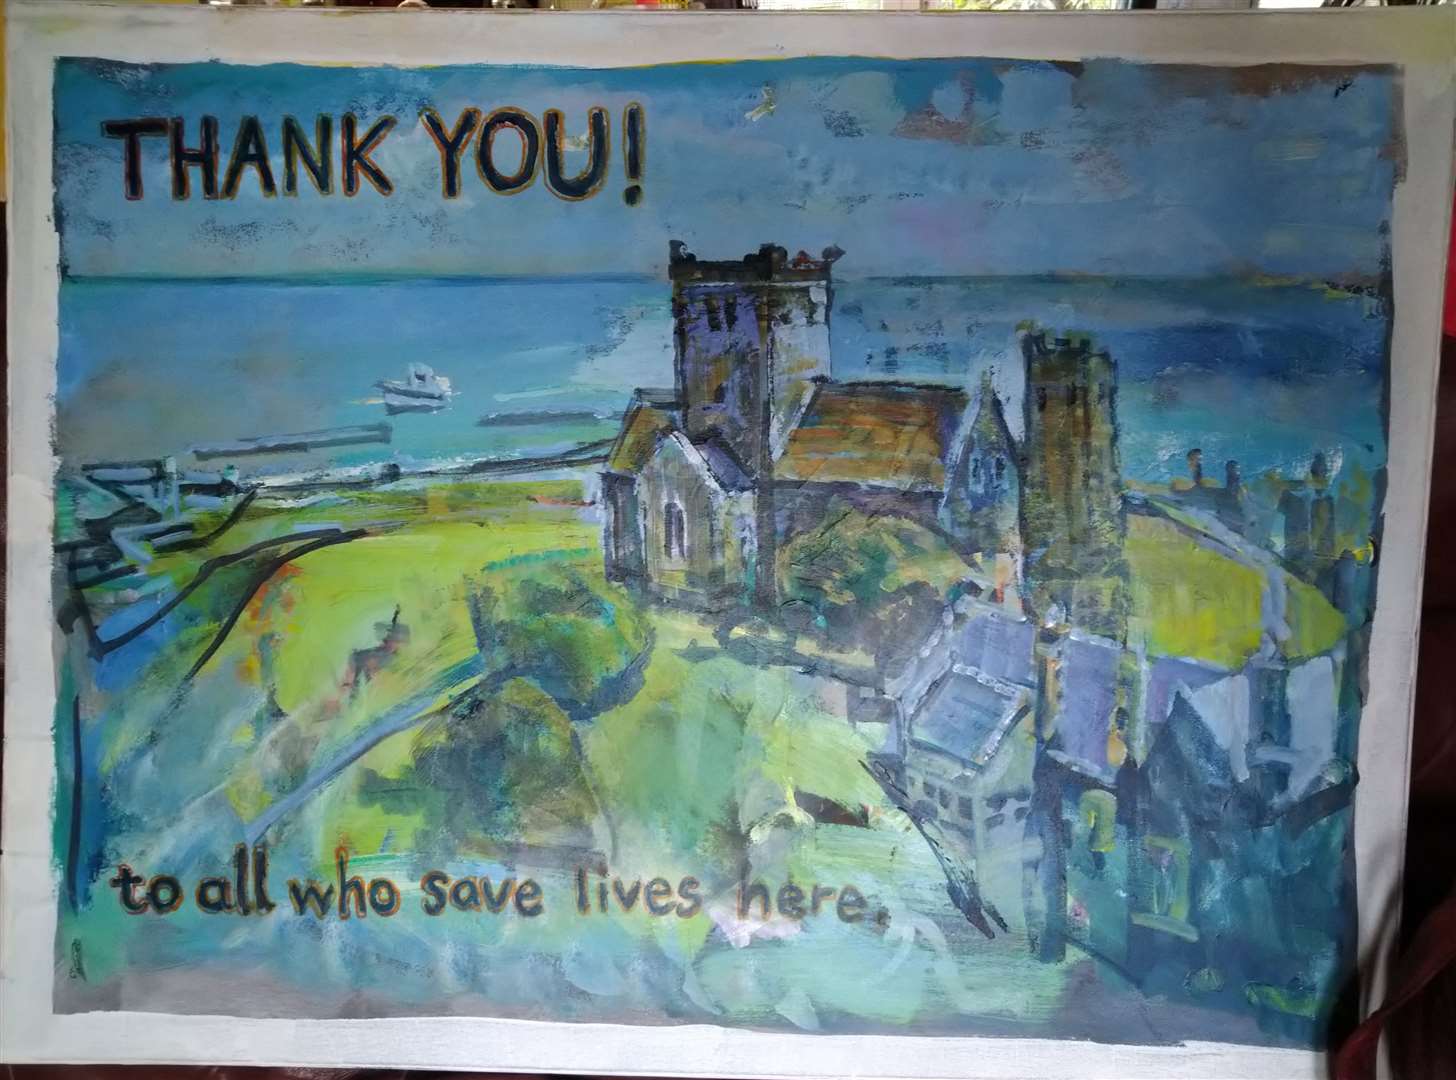 The Thank You artwork by Penny Bearman from Deal